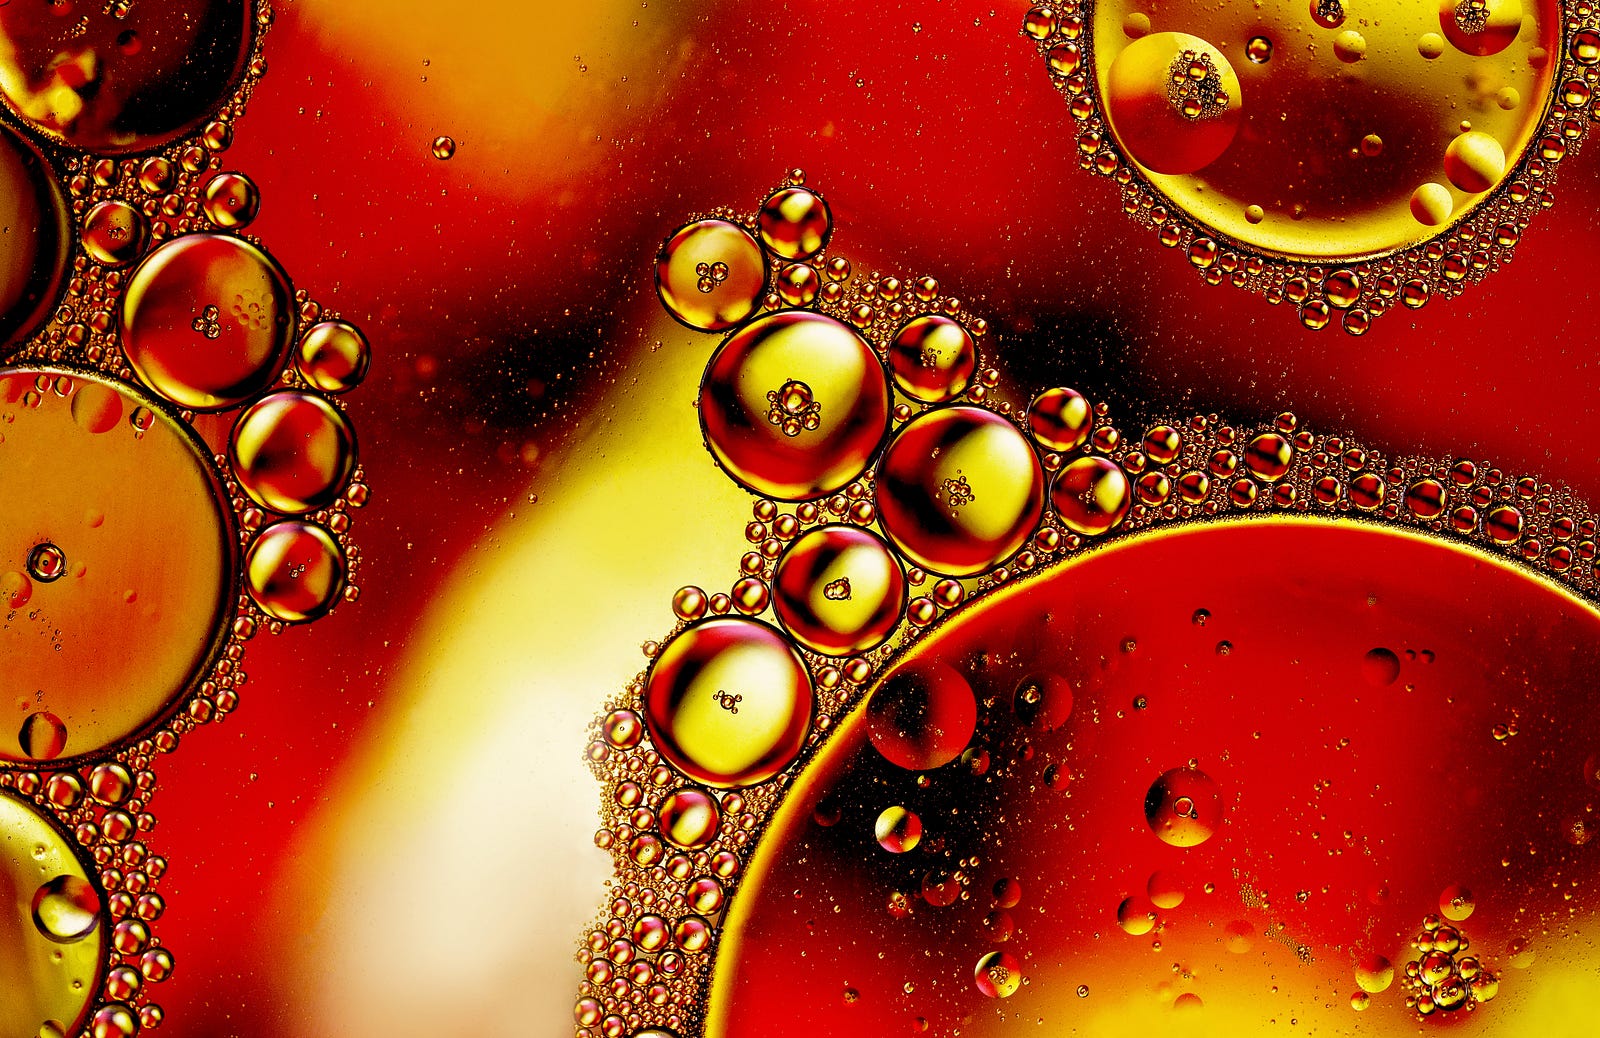 A close-up of olive oil, with oily bubbles sitting on a red and yellow  background. Olive oil consumption is associated with better heart health.